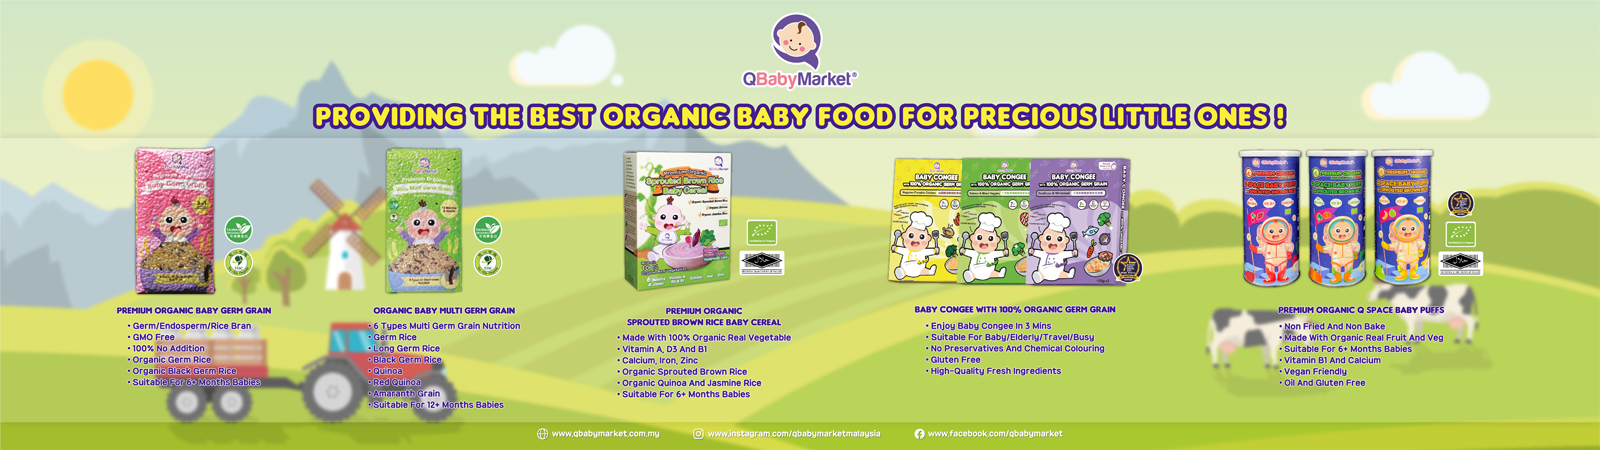 Q Baby Market Organic Baby Food: Because your baby deserves the best choices in life